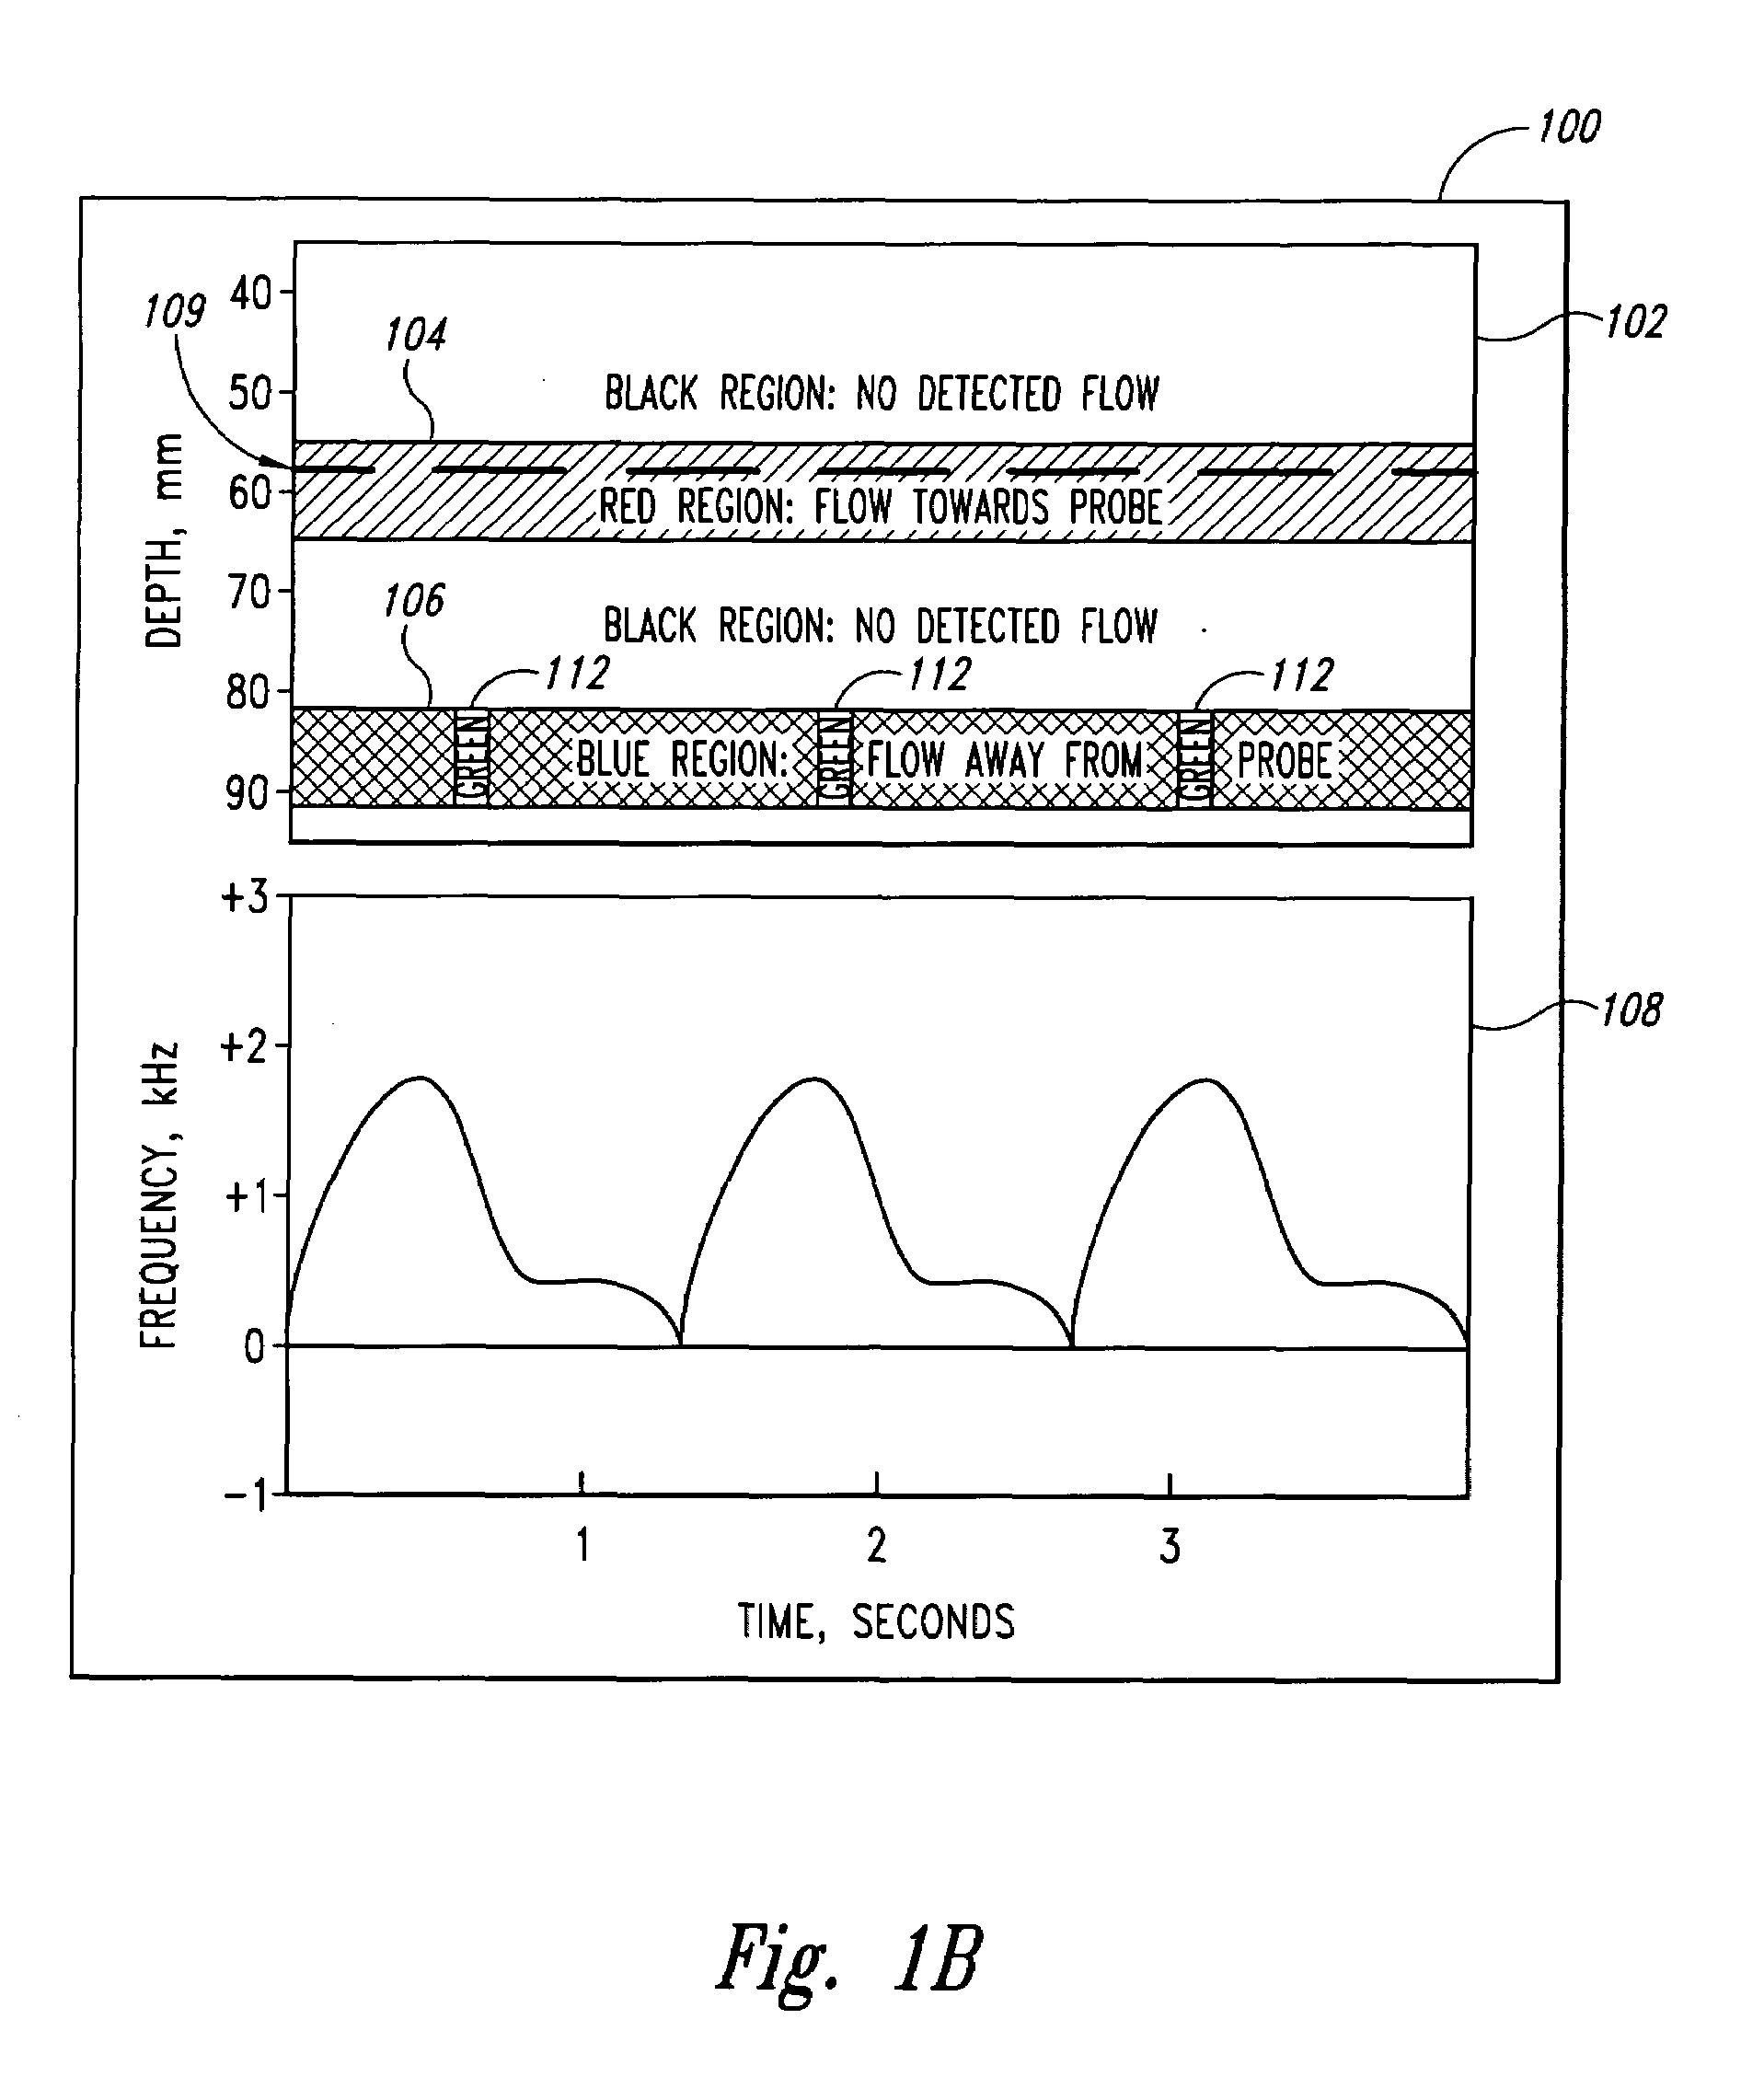 Doppler ultrasound method and apparatus for monitoring blood flow and hemodynamics